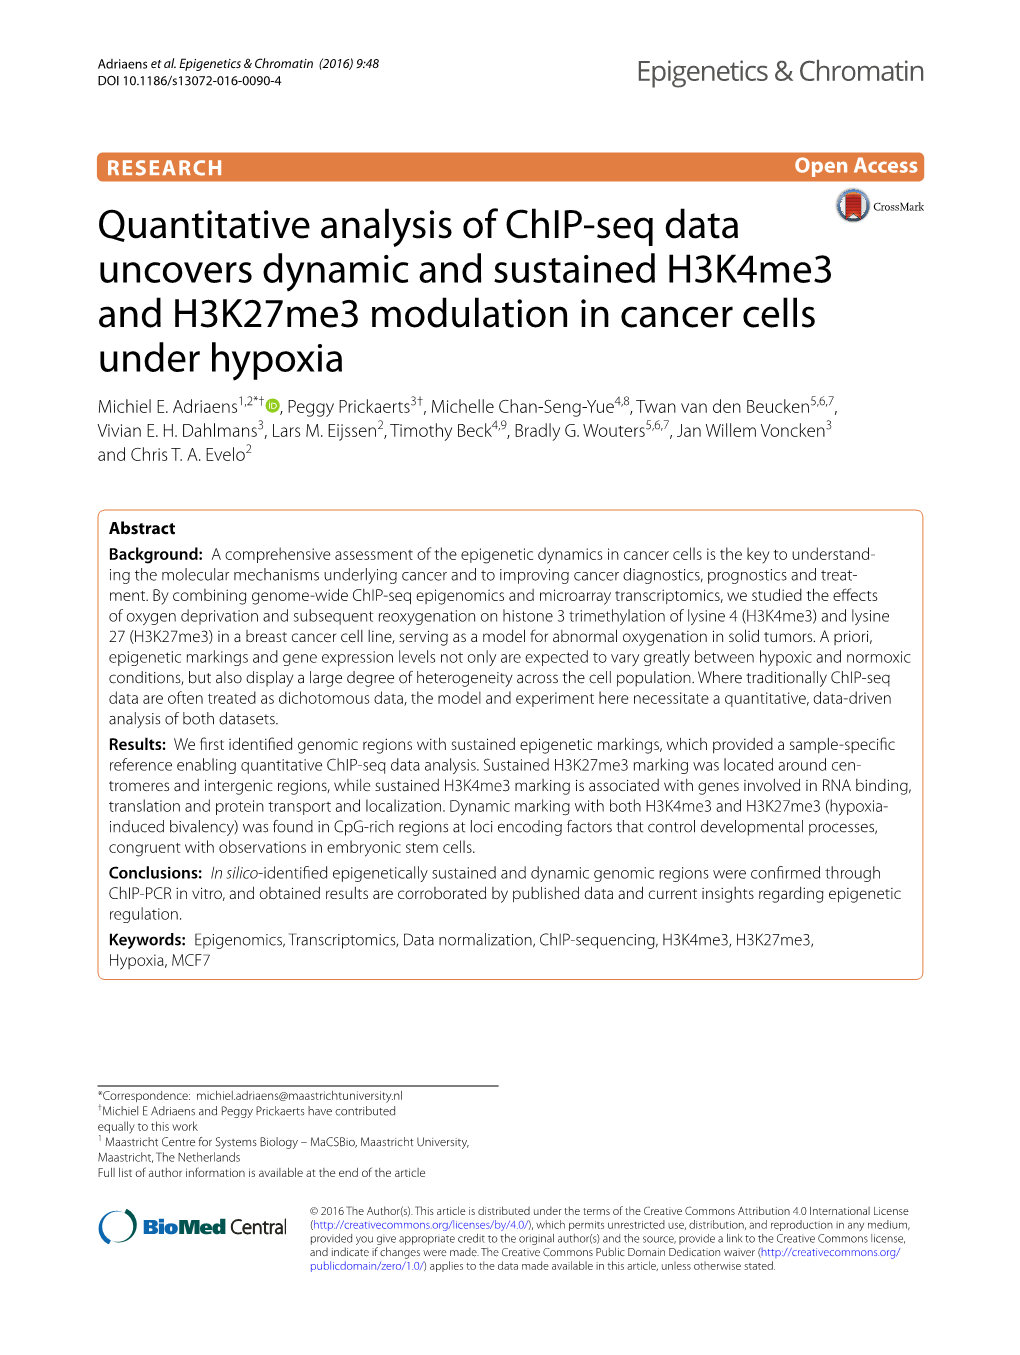 Quantitative Analysis of Chip-Seq Data Uncovers Dynamic and Sustained H3k4me3 and H3k27me3 Modulation in Cancer Cells Under Hypo